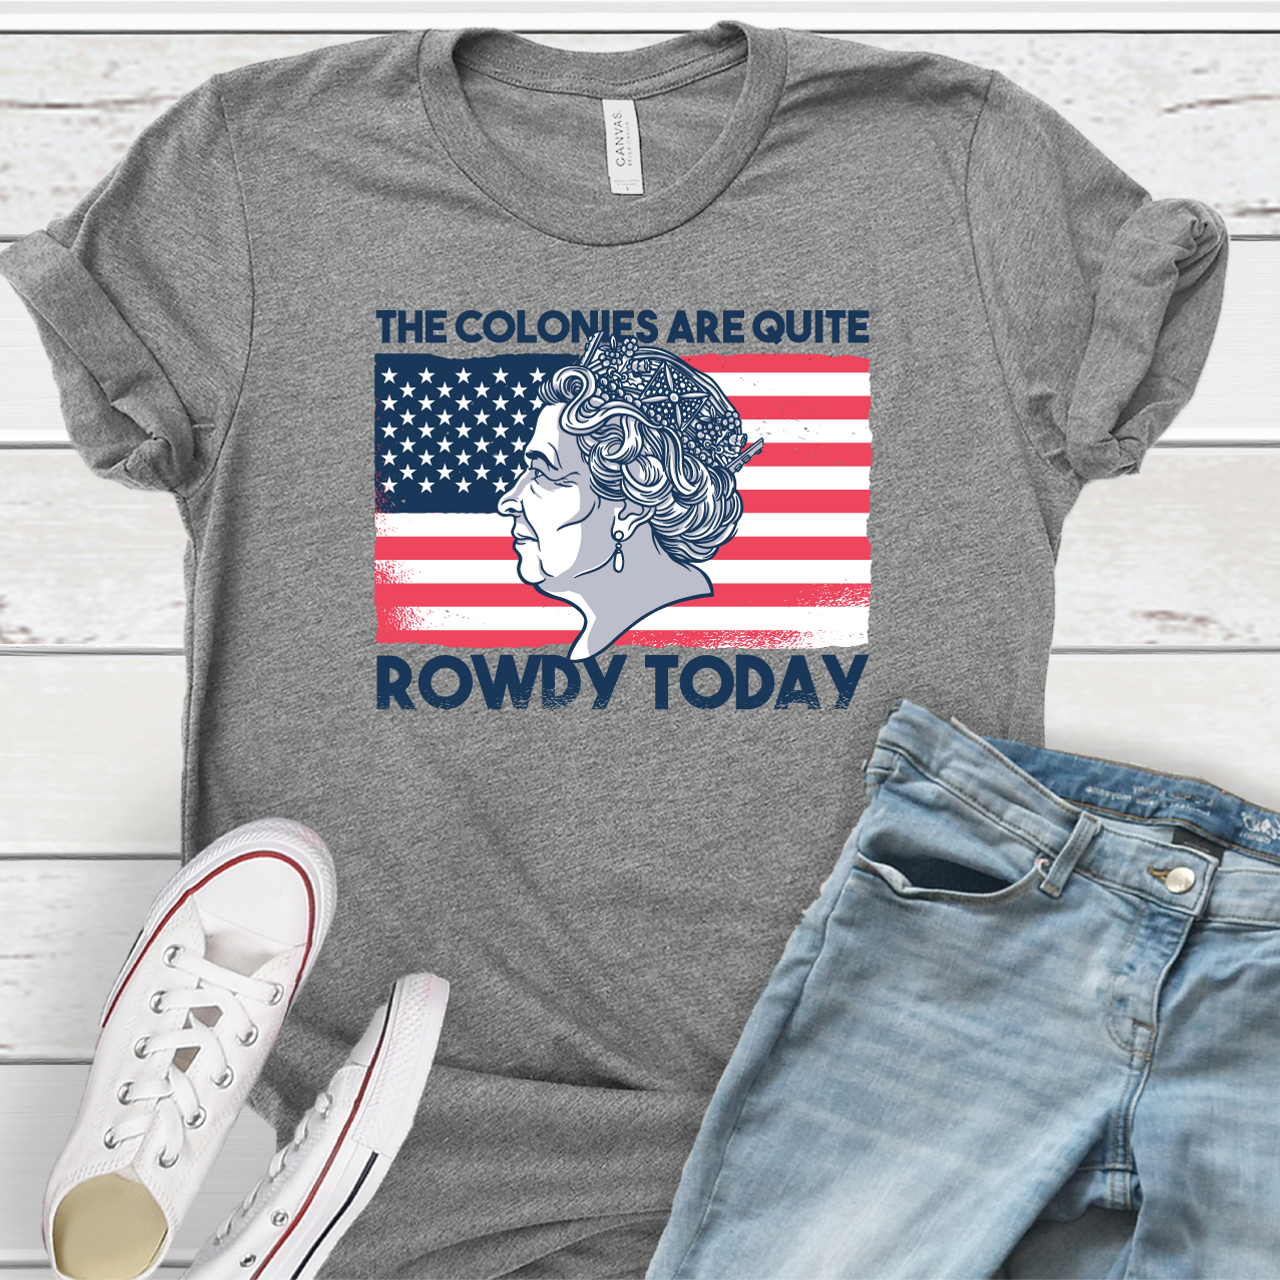 "The colonies are quite rowdy today" Crew Neck T-shirt